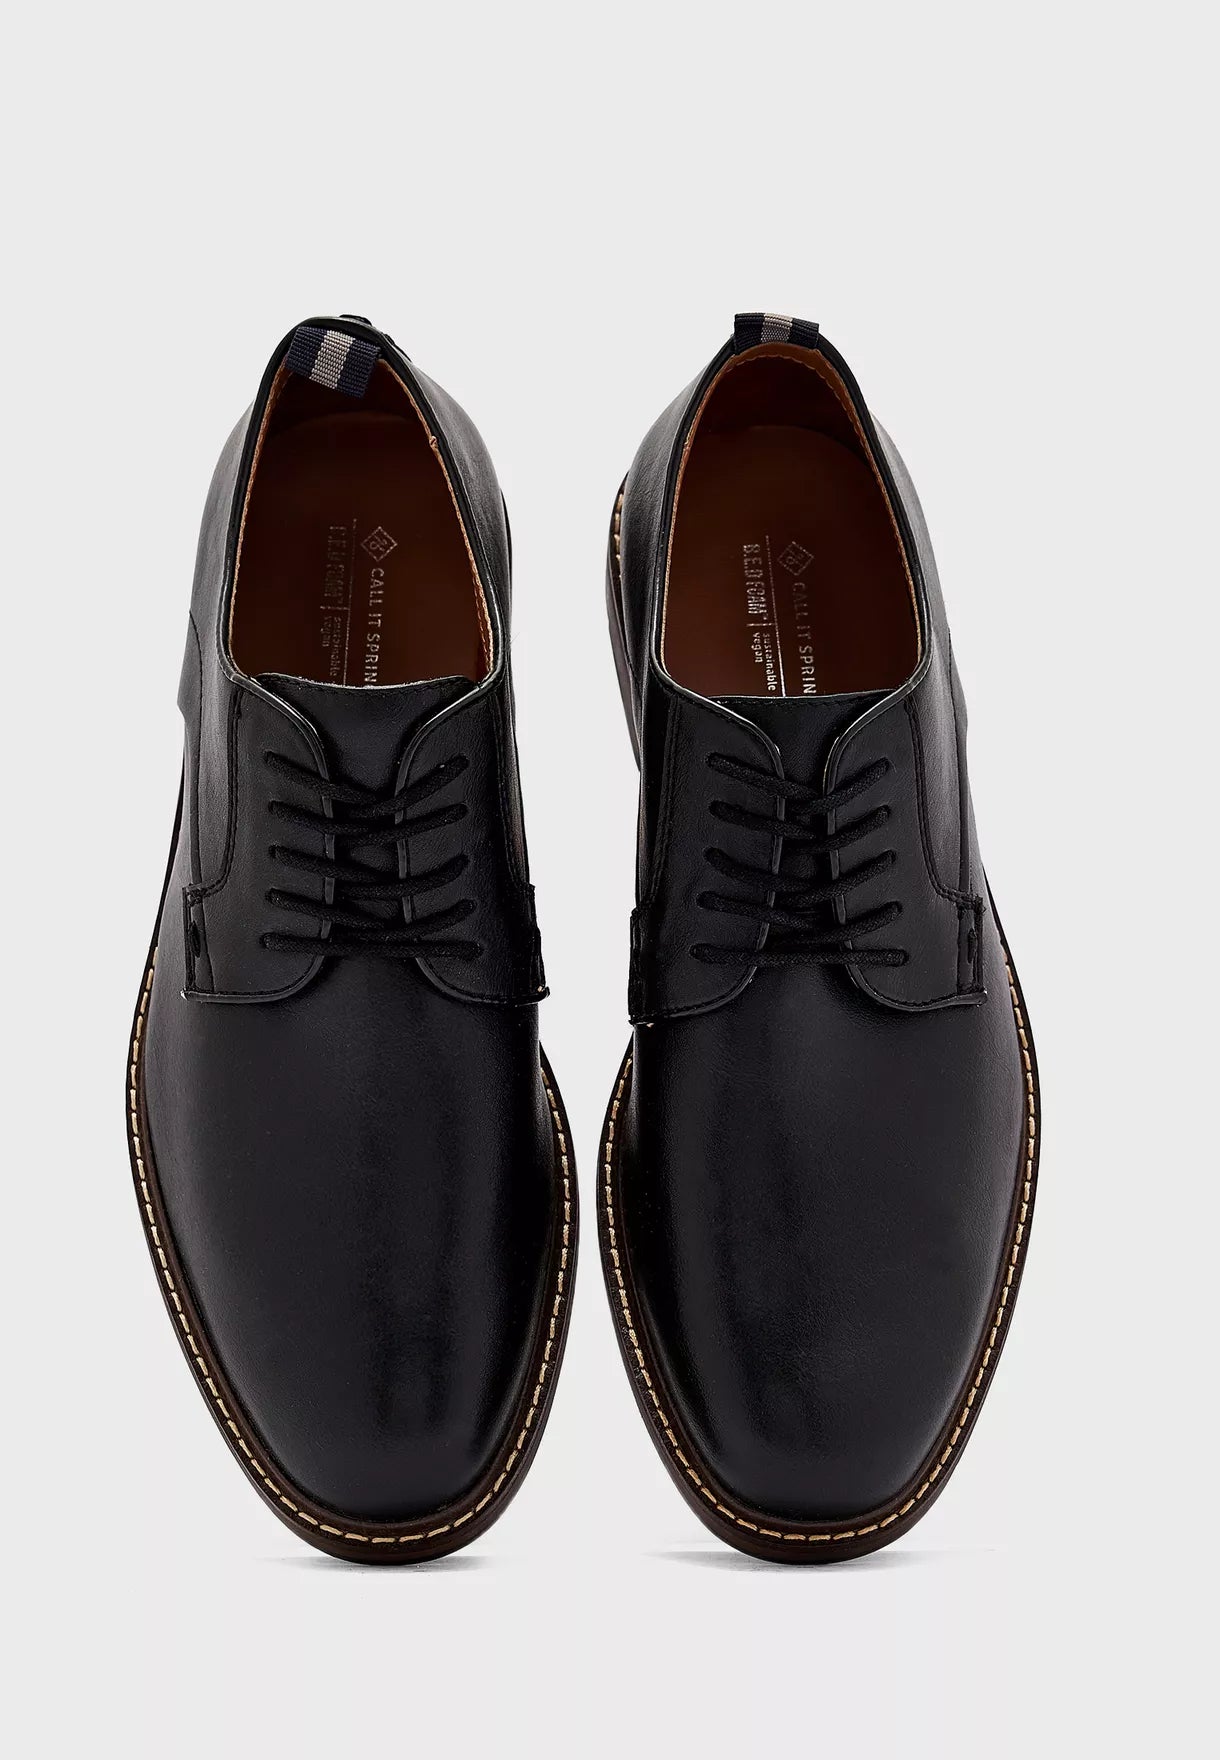 Lace Ups Formal Shoes